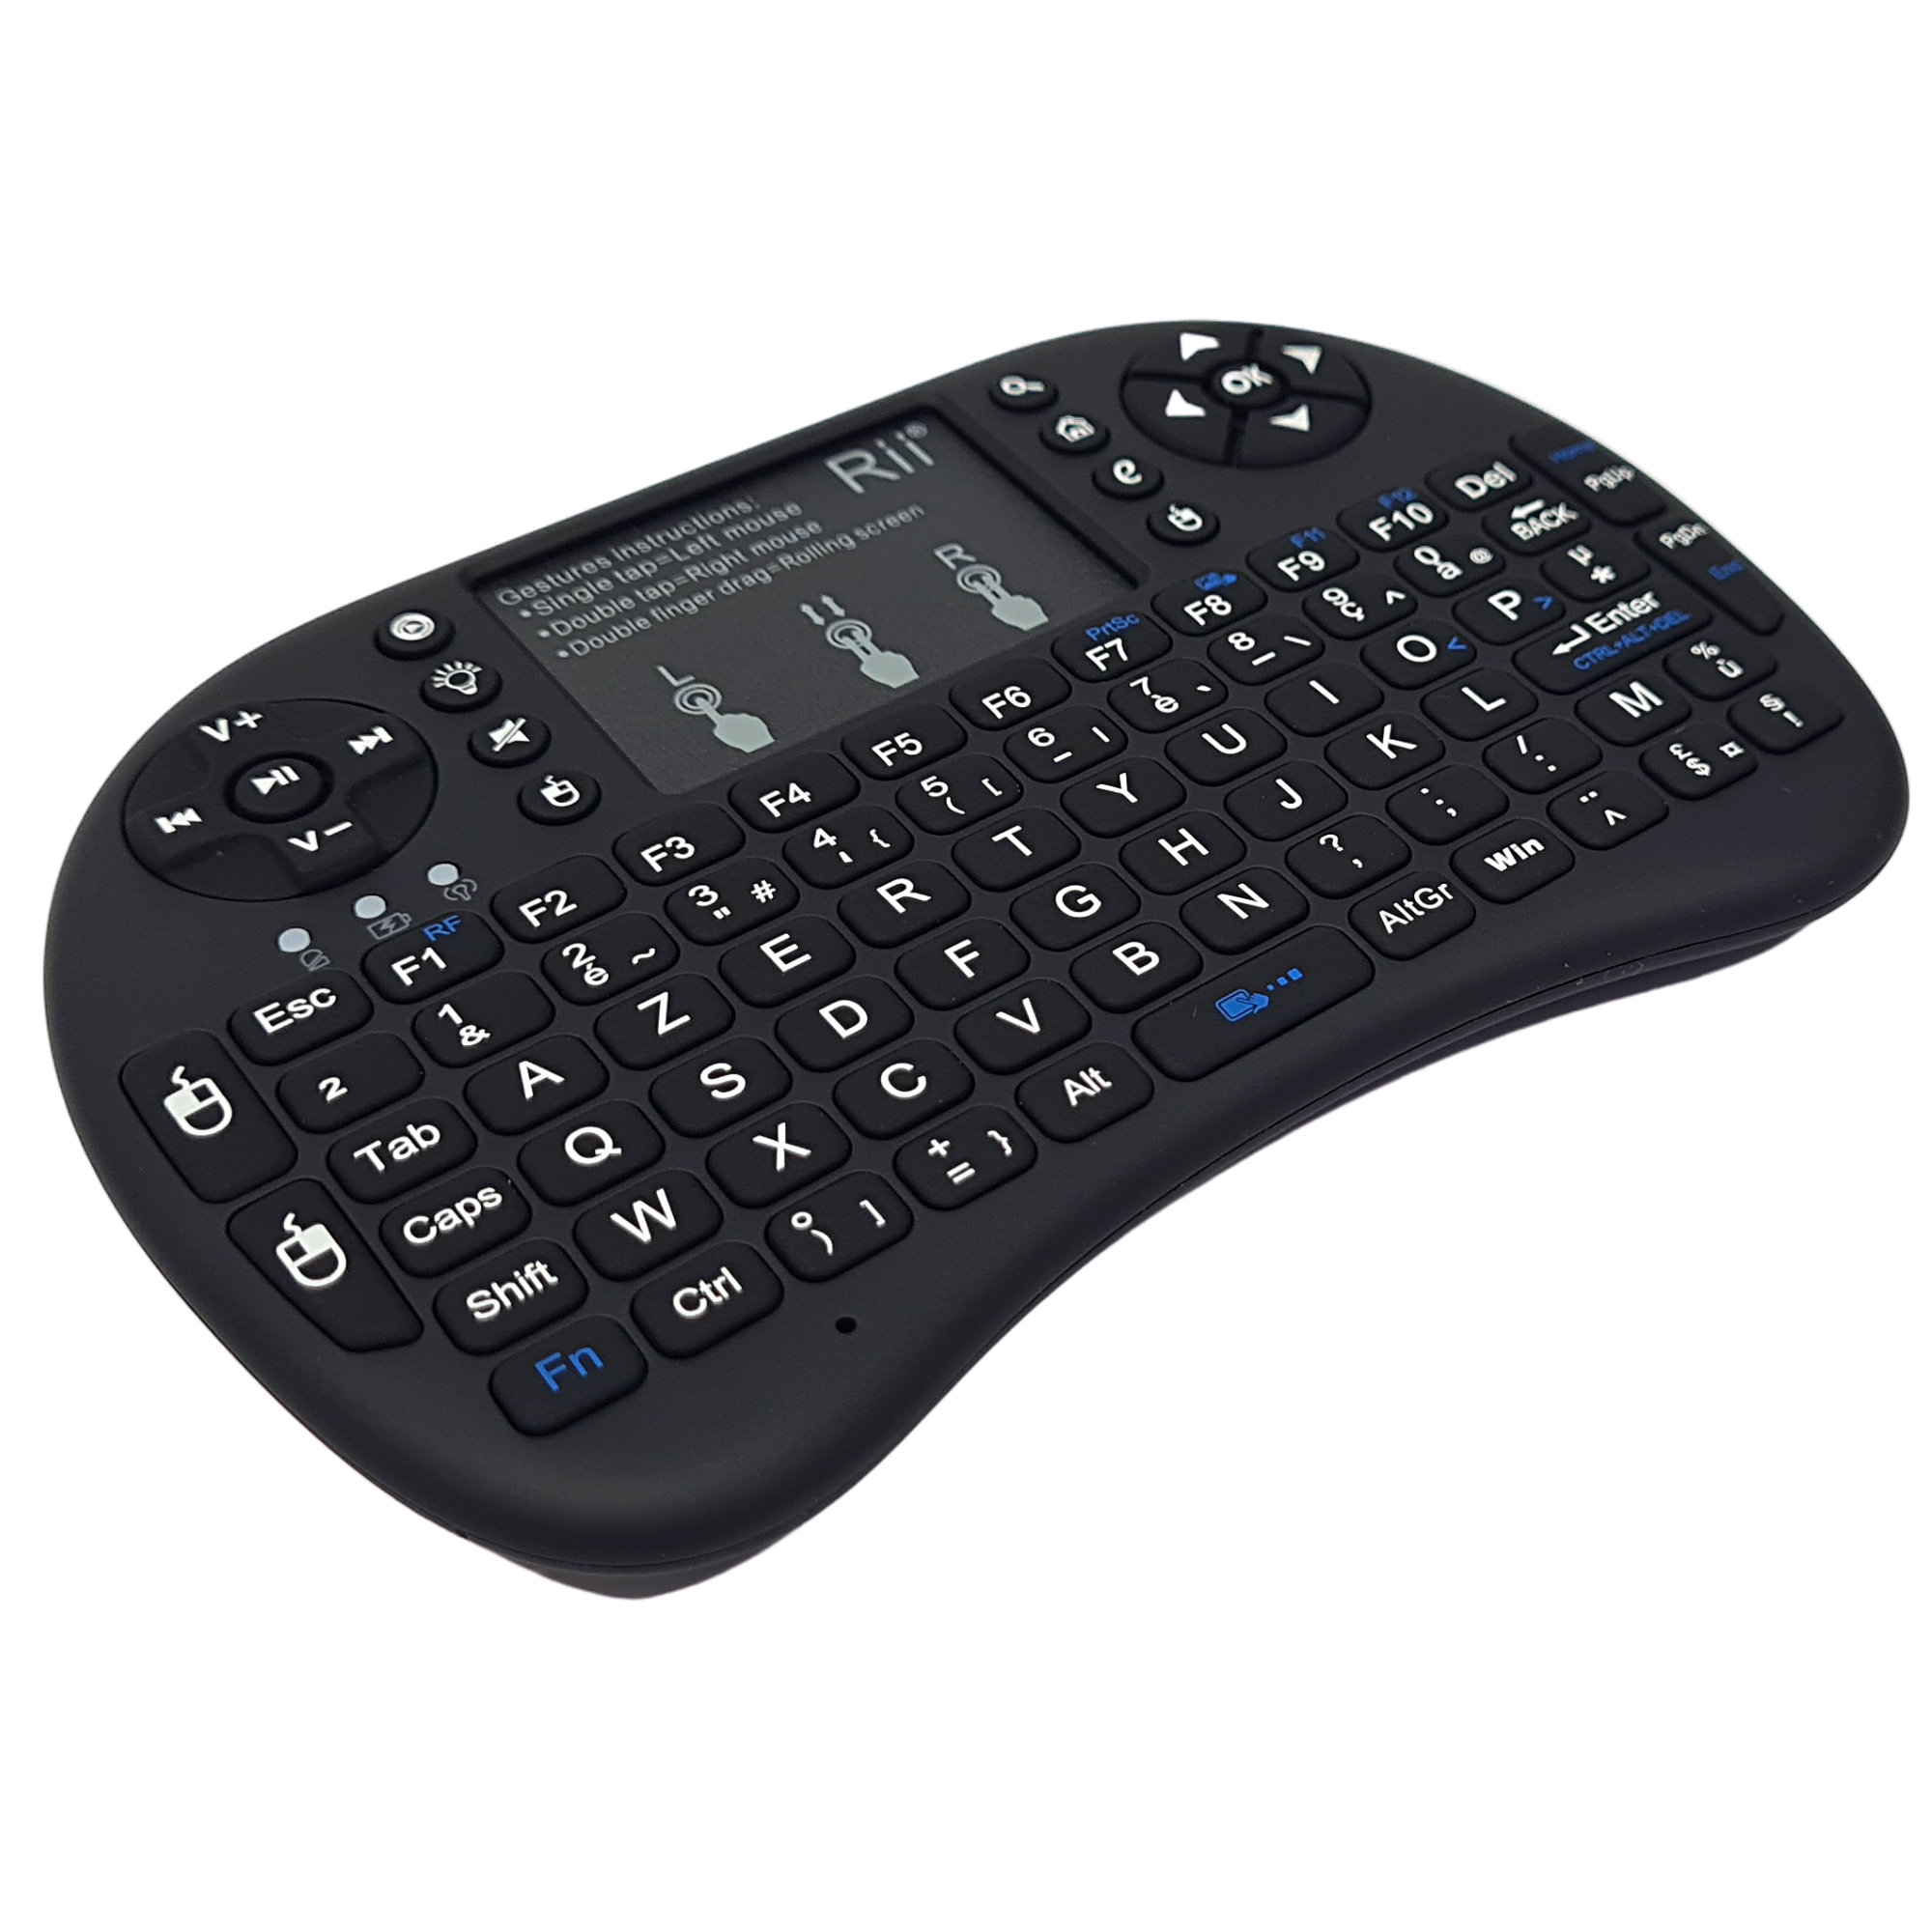 Rii i8+: Mini Wireless Keyboard (AZERTY), Backlit Ergonomic with Touchpad - for Raspberry 3/4, SmartTV, Mini PC, HTPC, Console, PC Hover